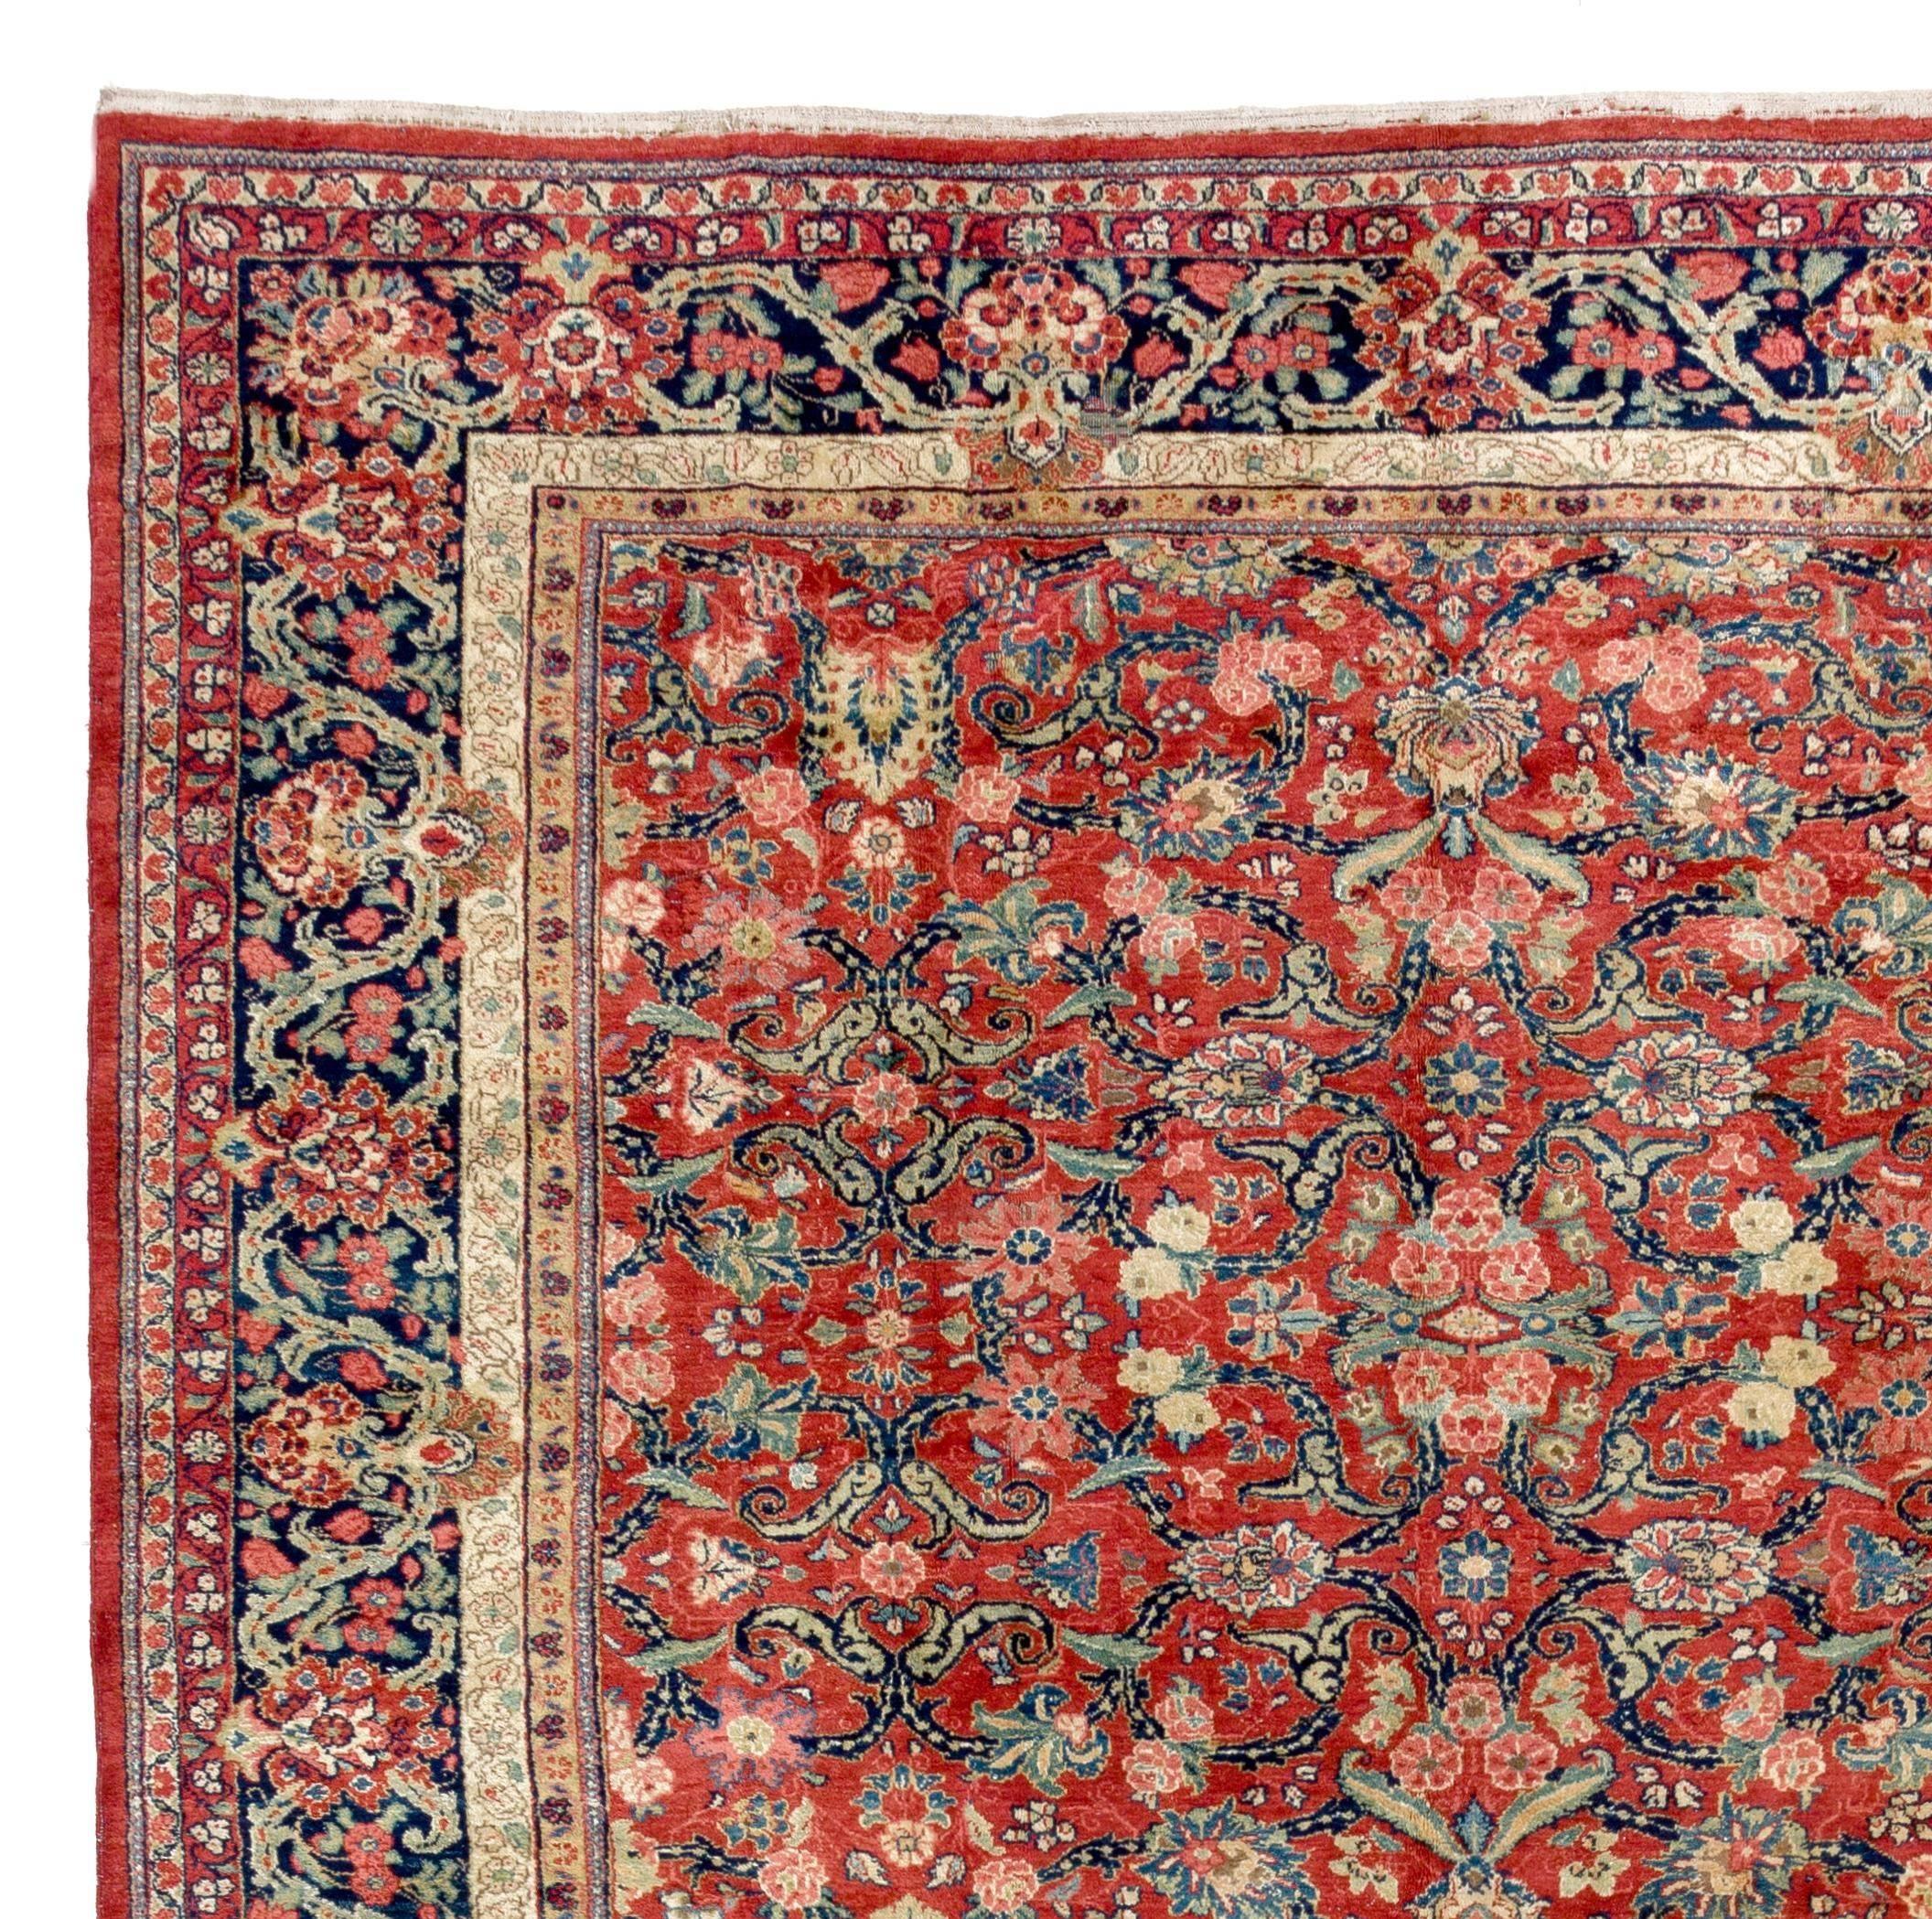 Large antique Persian Mahal carpet.
Measures: 11 x 18.4 ft.
This elegant rug has a madder field infused with a soft red hue featuring an overall design of scrolling lobed floral vines, palmettes and curling leaves framed by a dark indigo border of